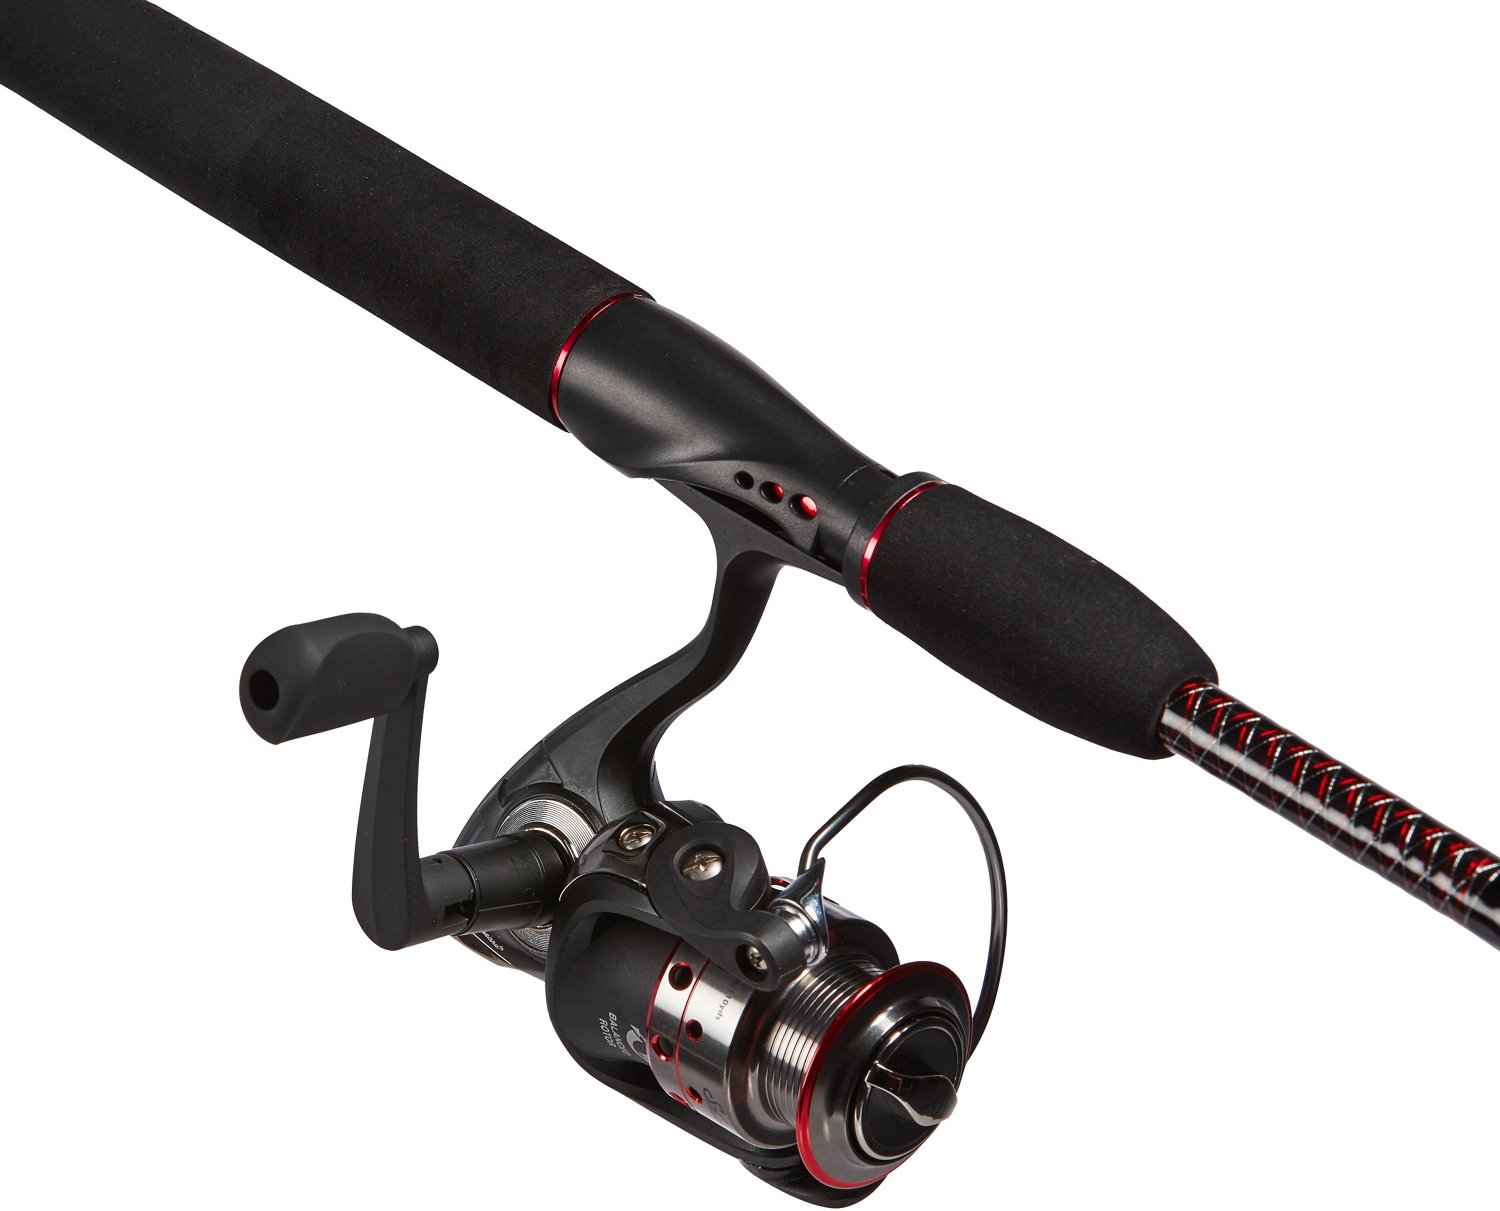 Ugly Stik 6'6” GX2 Travel Fishing Rod and Reel Spinning Combo